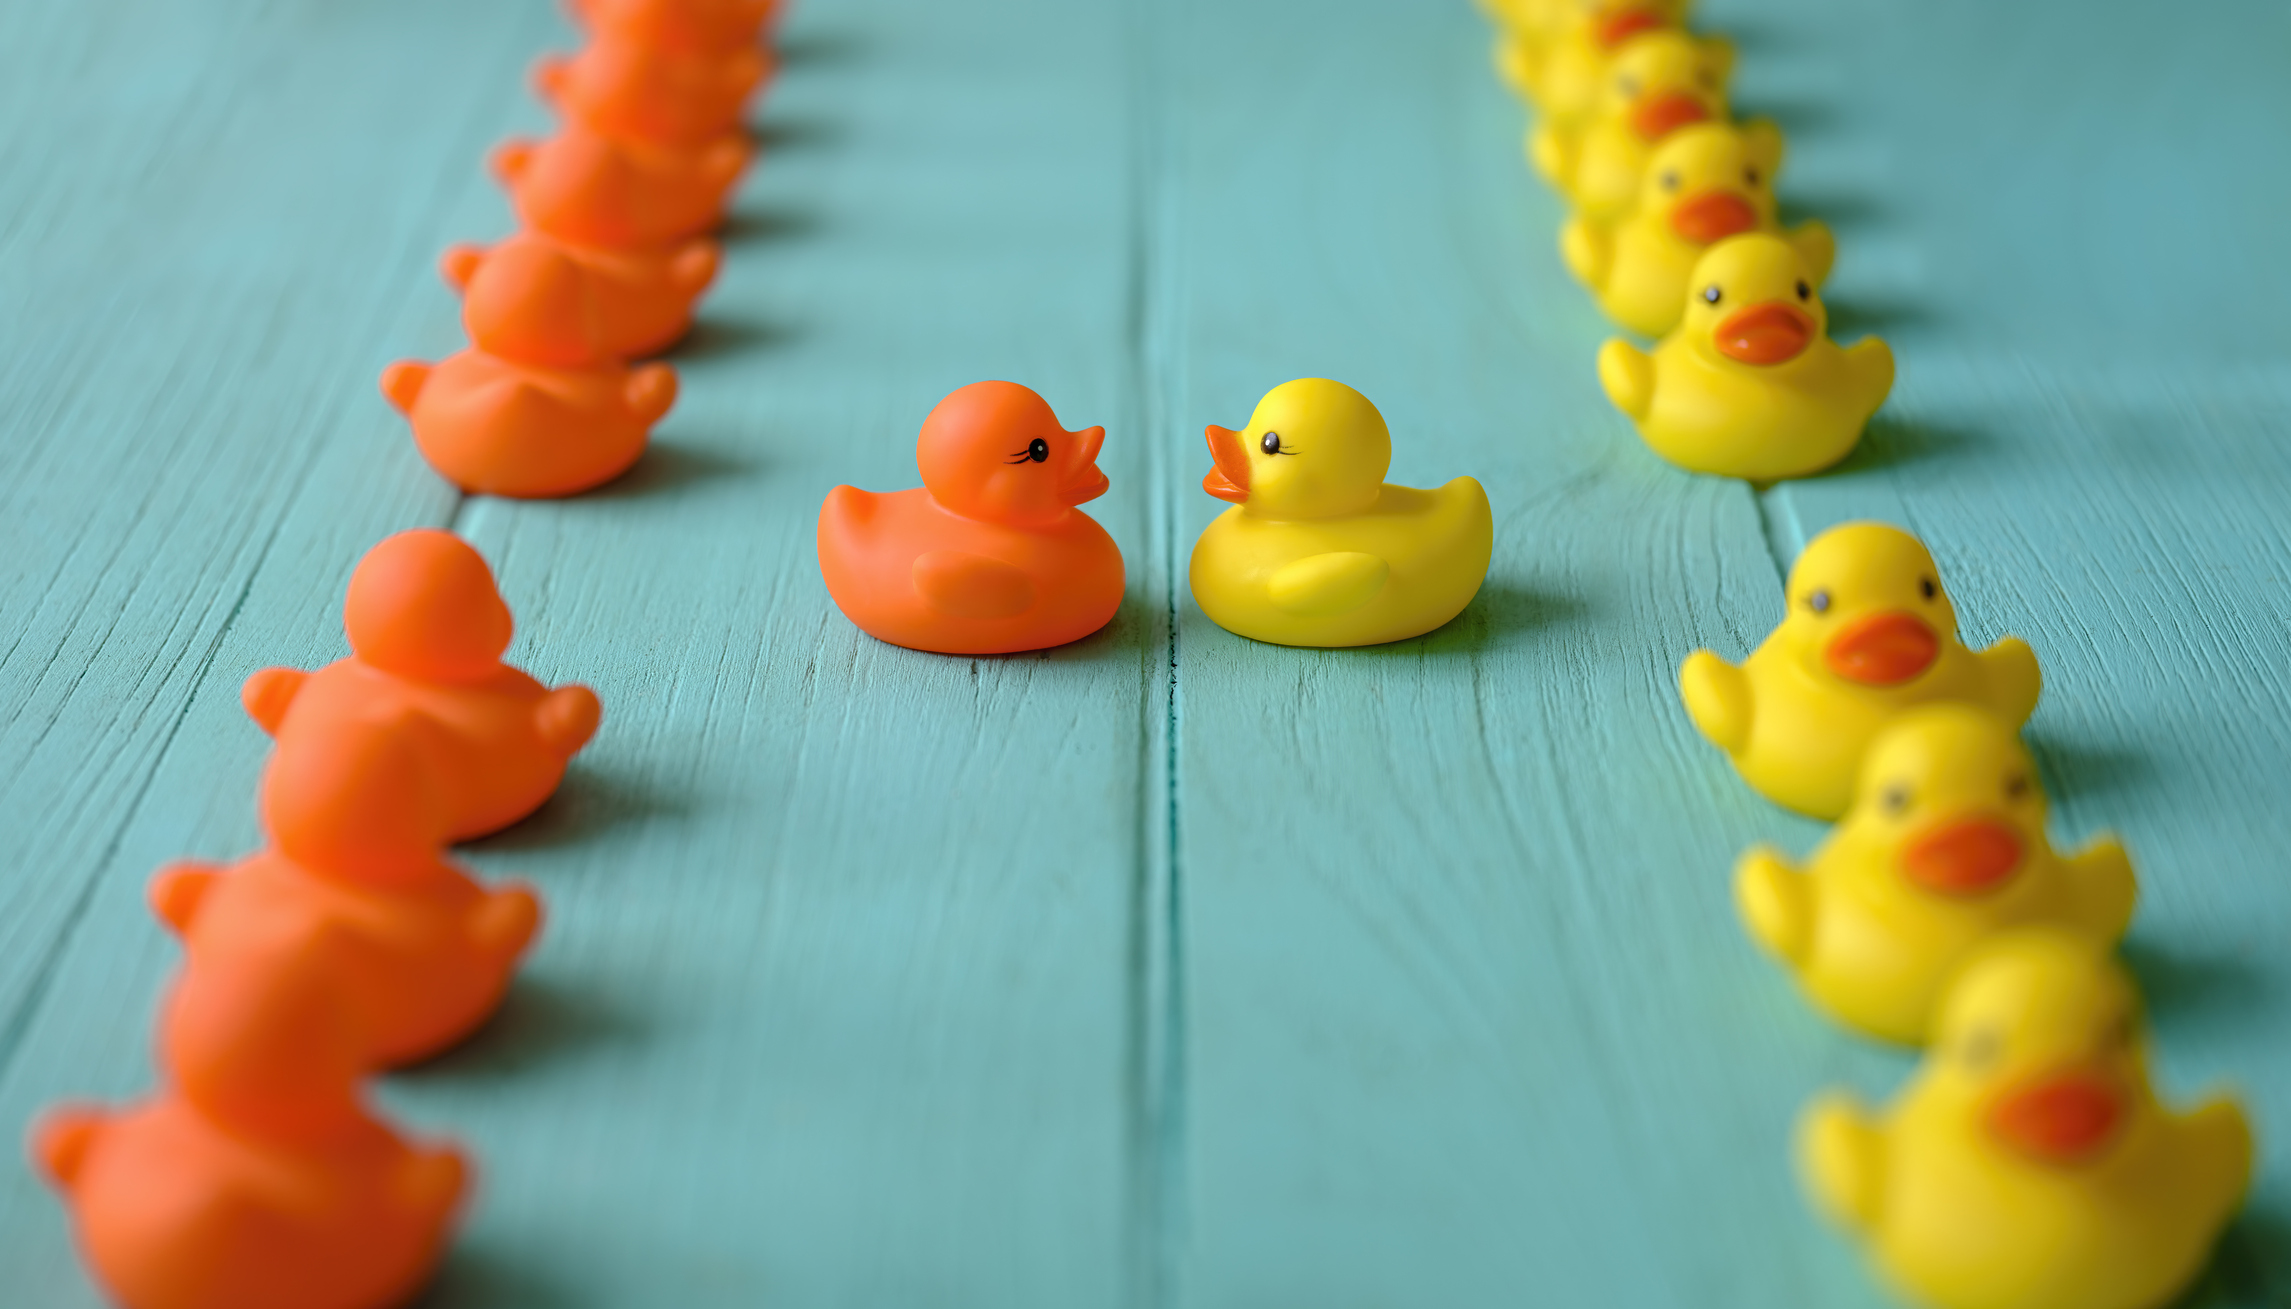 Line of yellow and orange rubber ducks, moving in opposite orderly lines, with one yellow and one orange duck breaking ranks of their lines to meet together in the middle, set on a turquoise colored wooden grained background, conceptually representing water. Concept image representing; standing out from the crowd, meeting, against the grain, freedom, individuality, change, innovation etc.